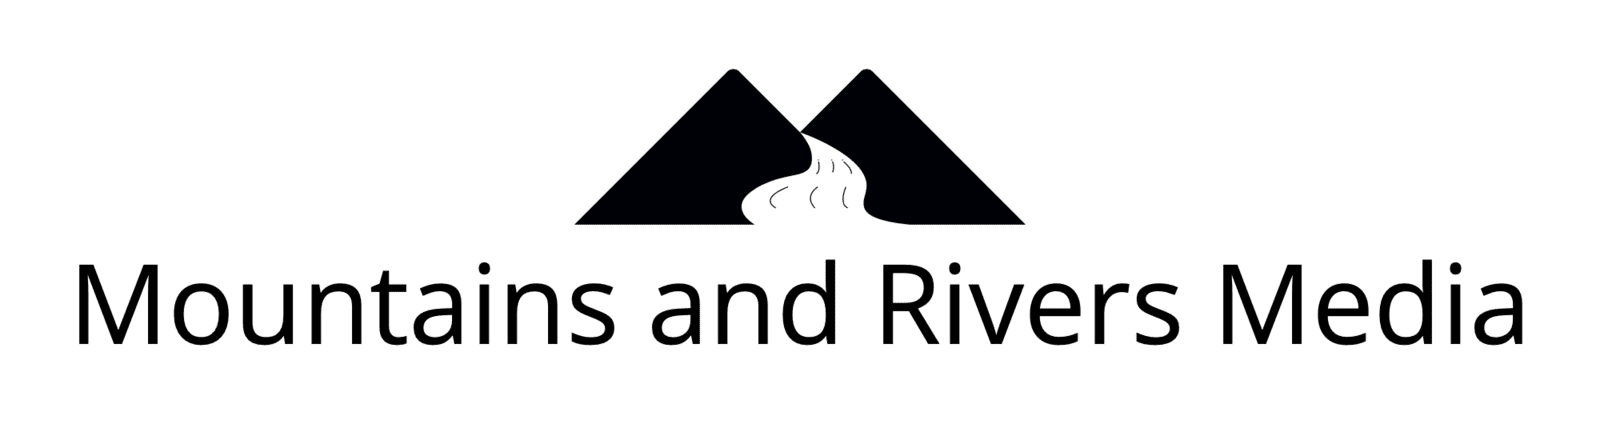 Mountains and Rivers Media